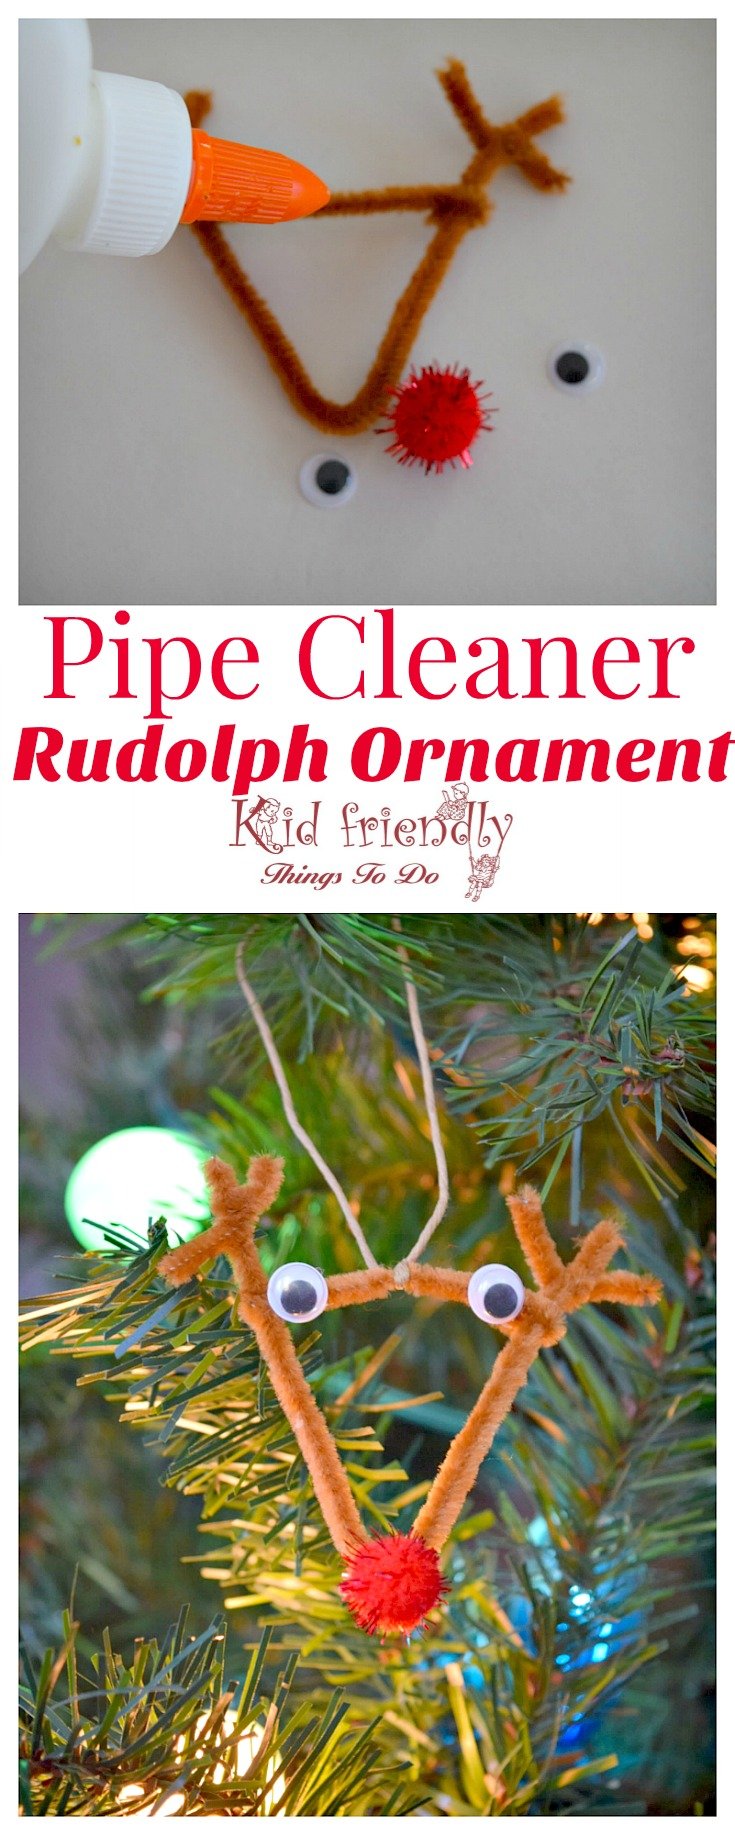 Easy DIY Pipe Cleaner Rudolph Ornament for Kids to Make - Perfect for preschool, and school Christmas Party Craft!   www.kidfriendlythingstodo.com